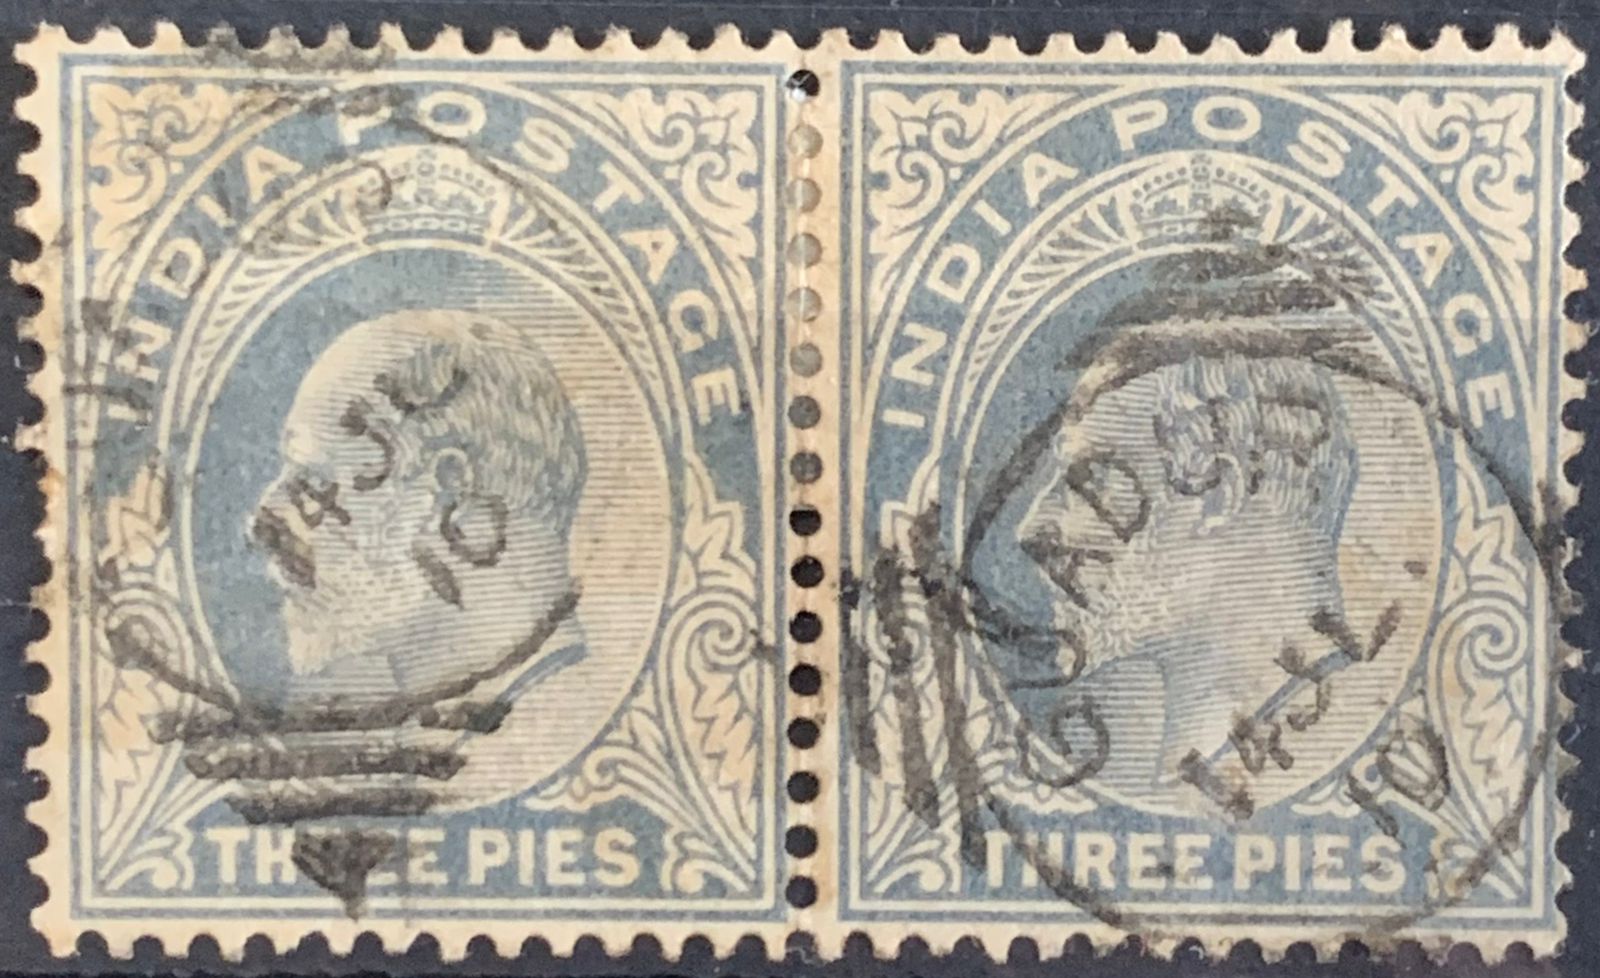 India 1902 KEVII 3p Pair Used Abroad in GUADUR Fine Cancelled